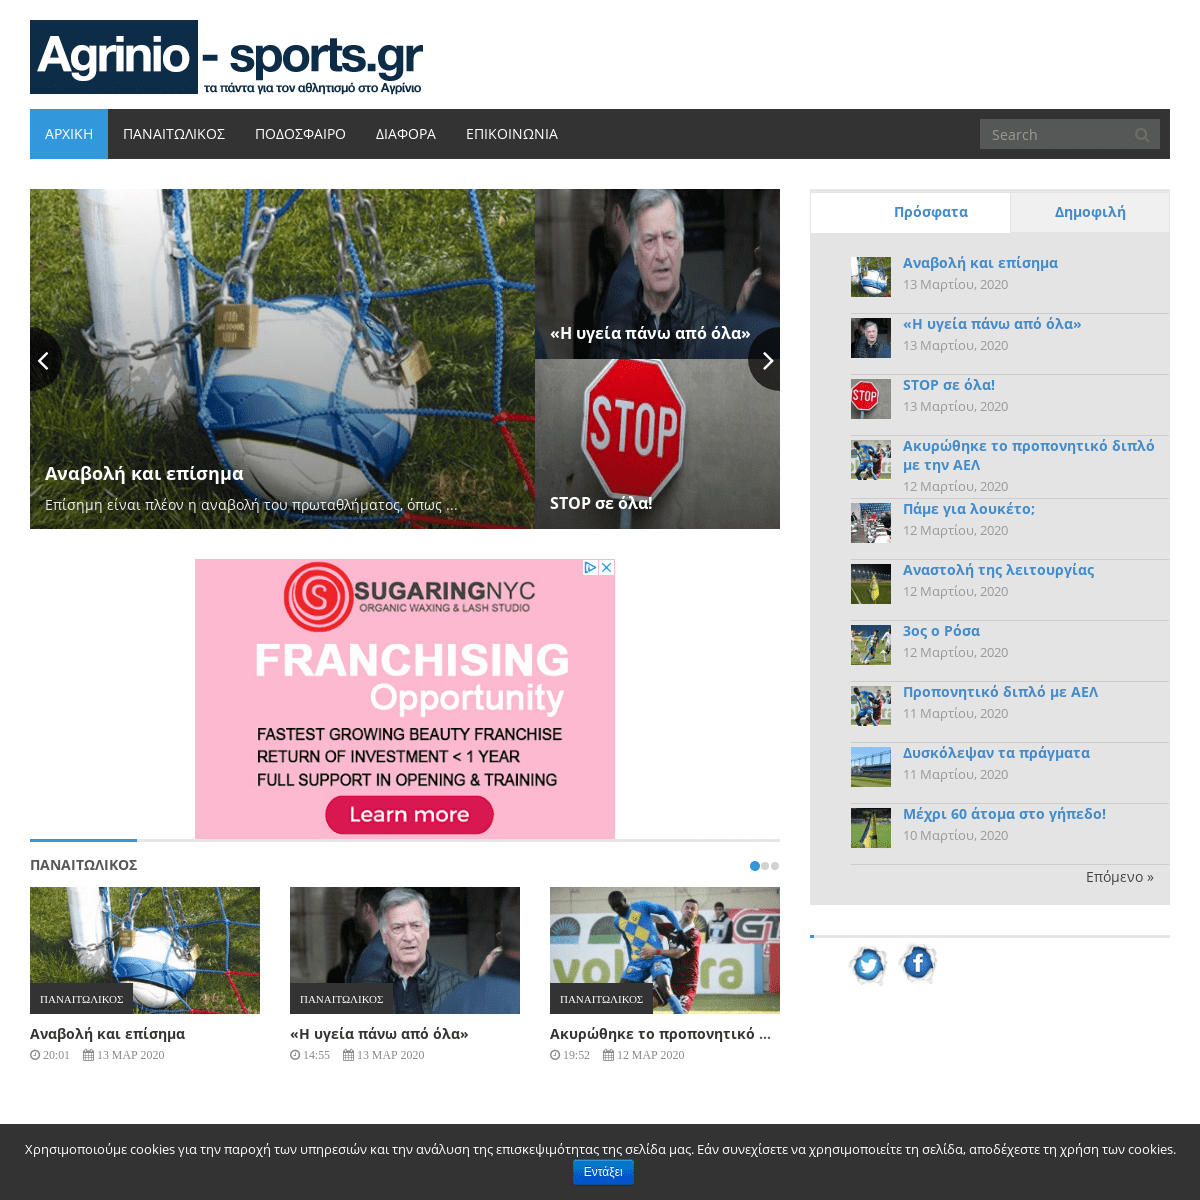 A complete backup of agrinio-sports.gr